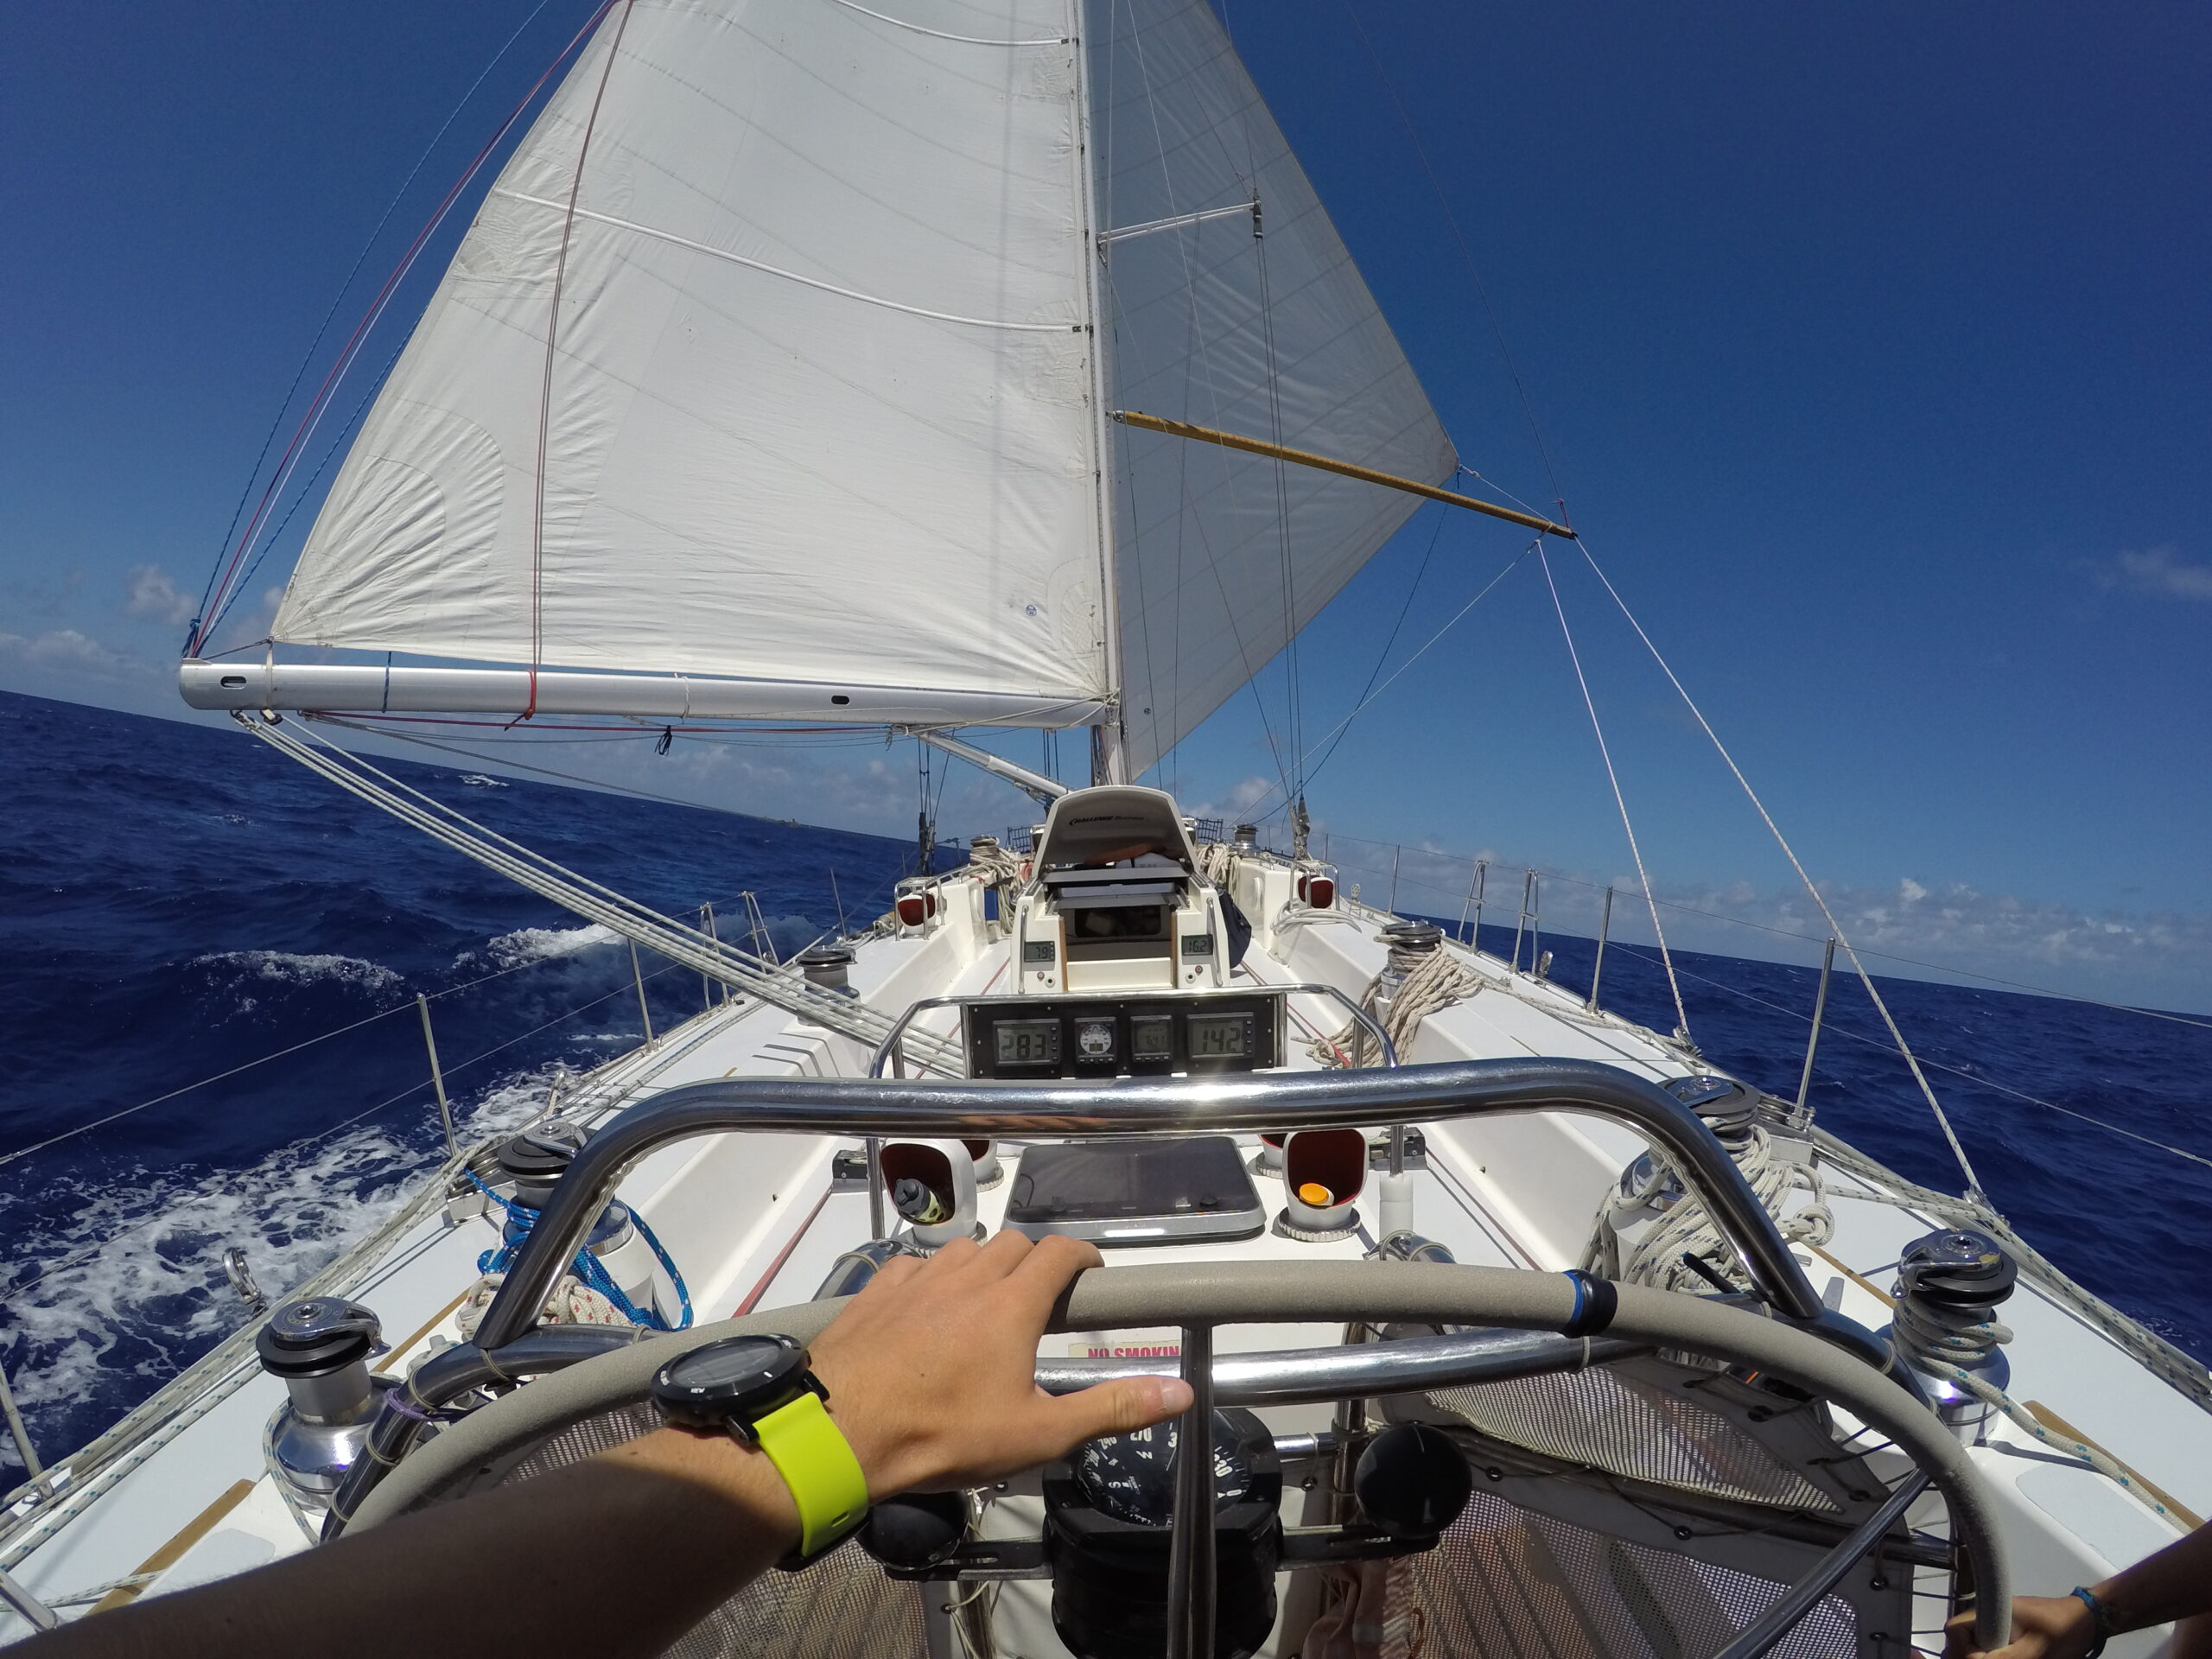 How to Gain More Sailing Experience After You Have Completed Your RYA Sailing Courses